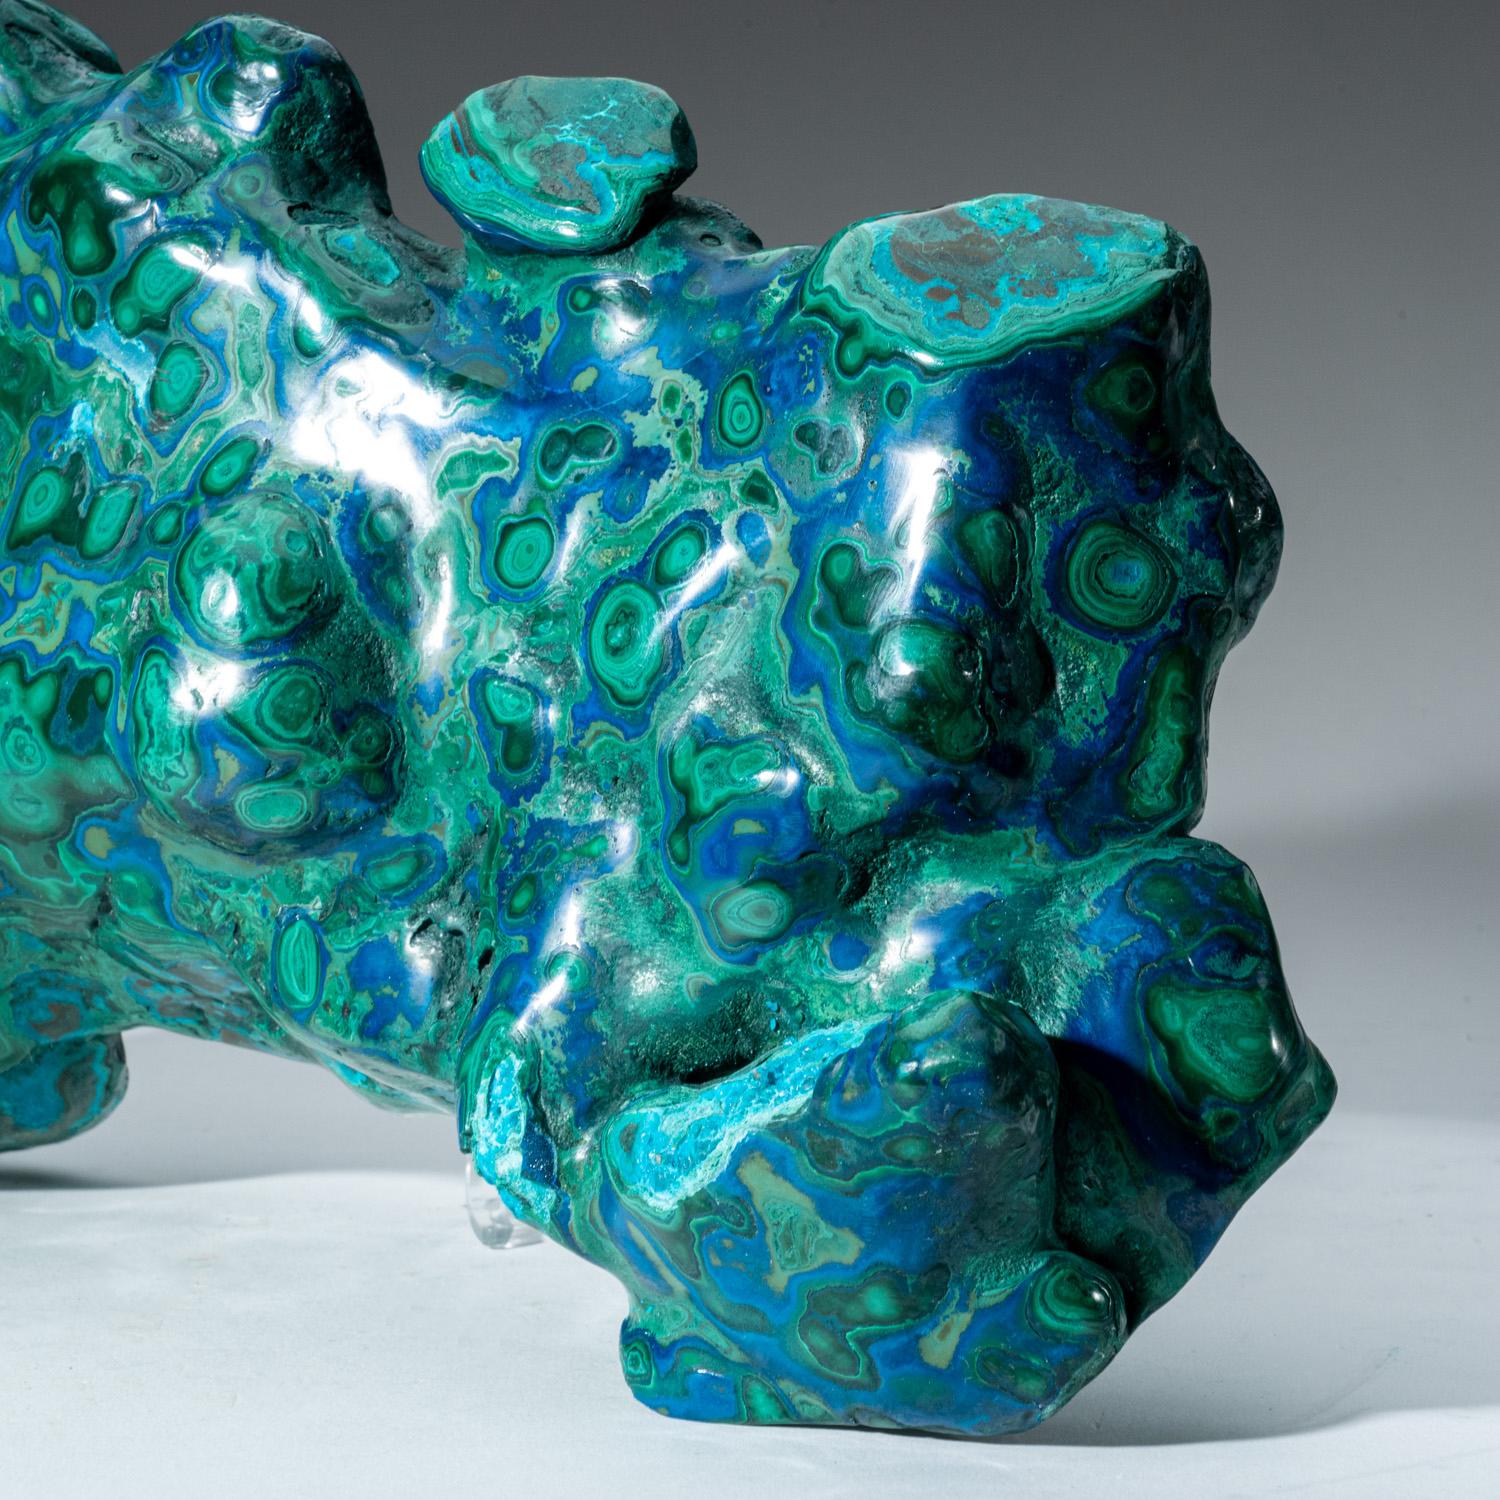 Congolese Genuine Polished Malachite and Azurite Freeform (9.5 lbs) For Sale